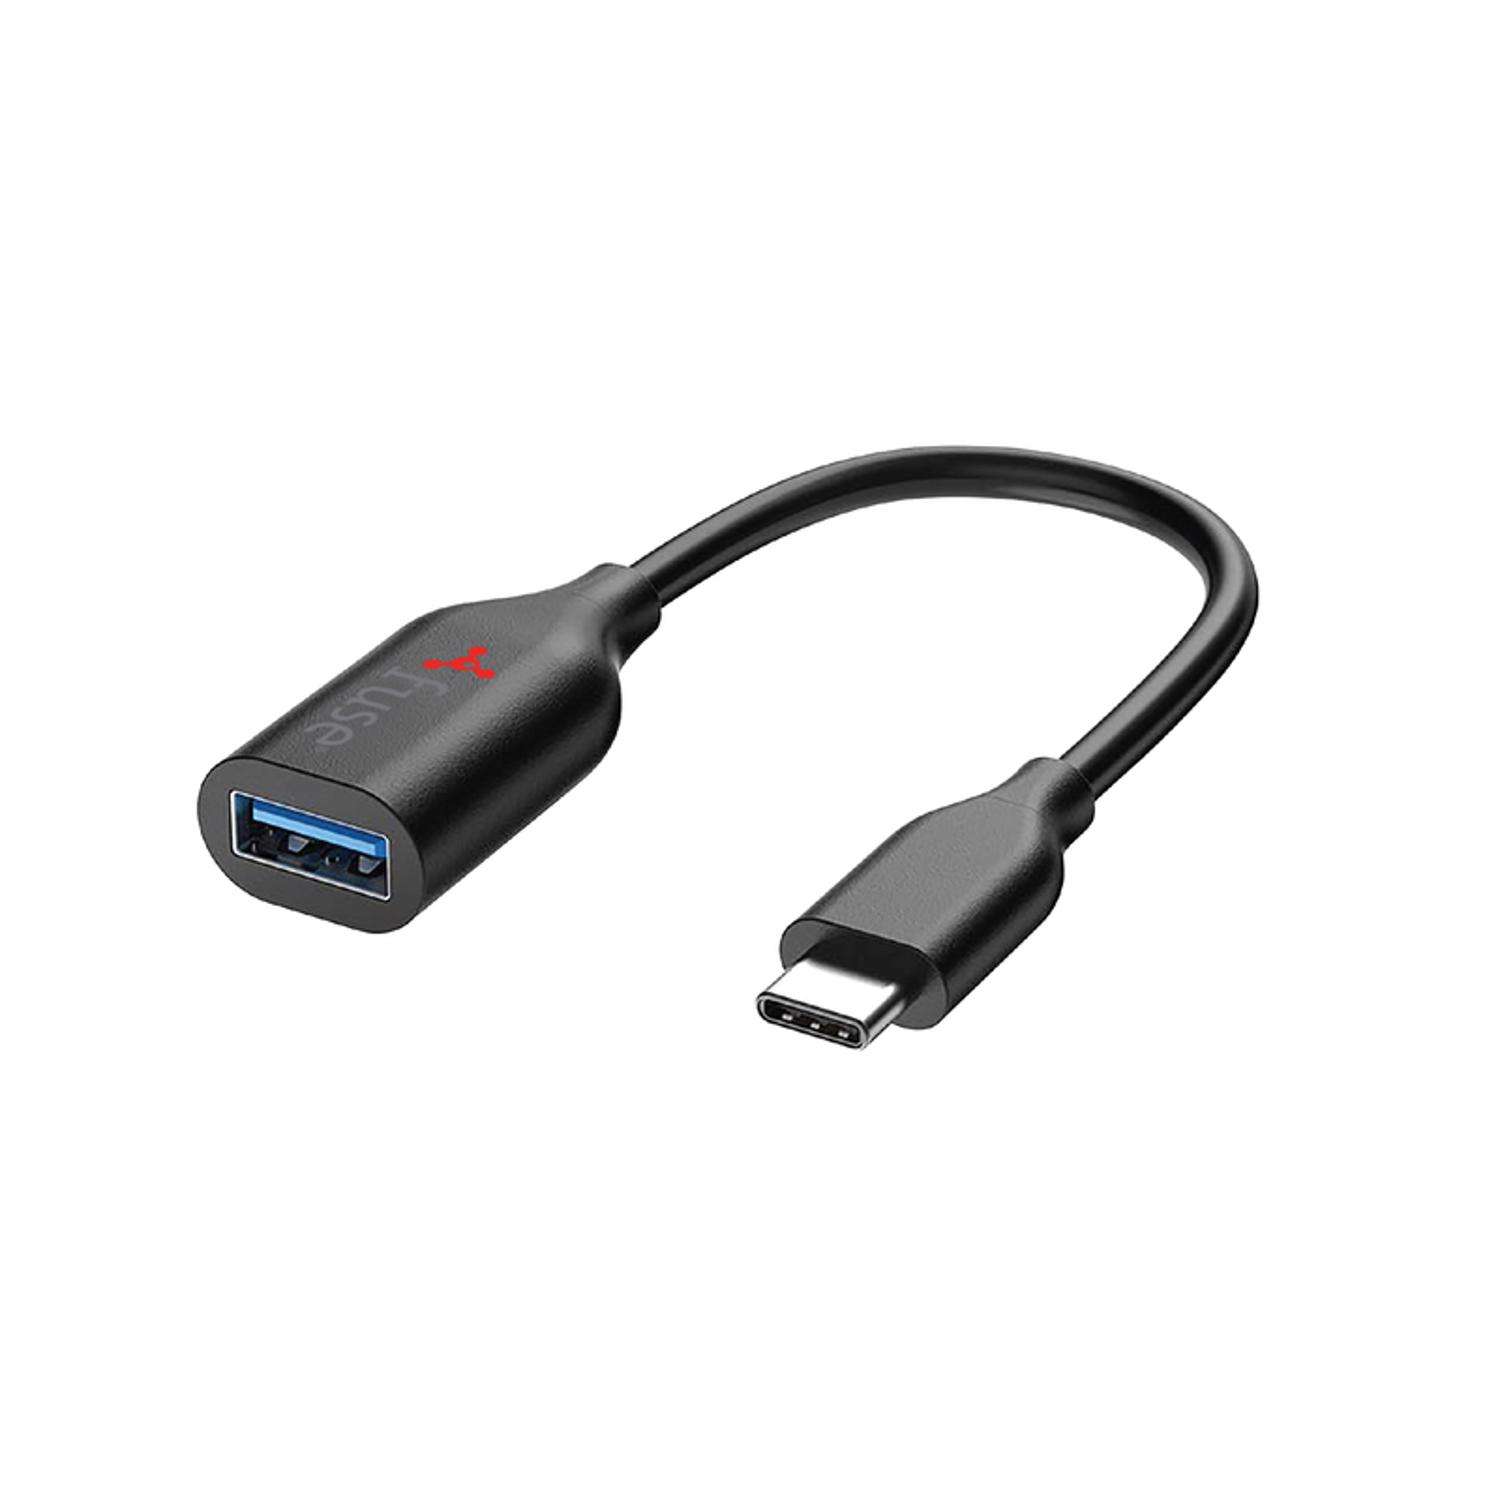 PRO OTG Power Cable Works for Samsung Galaxy Prevail 2 with Power Connect to Any Compatible USB Accessory with MicroUSB 